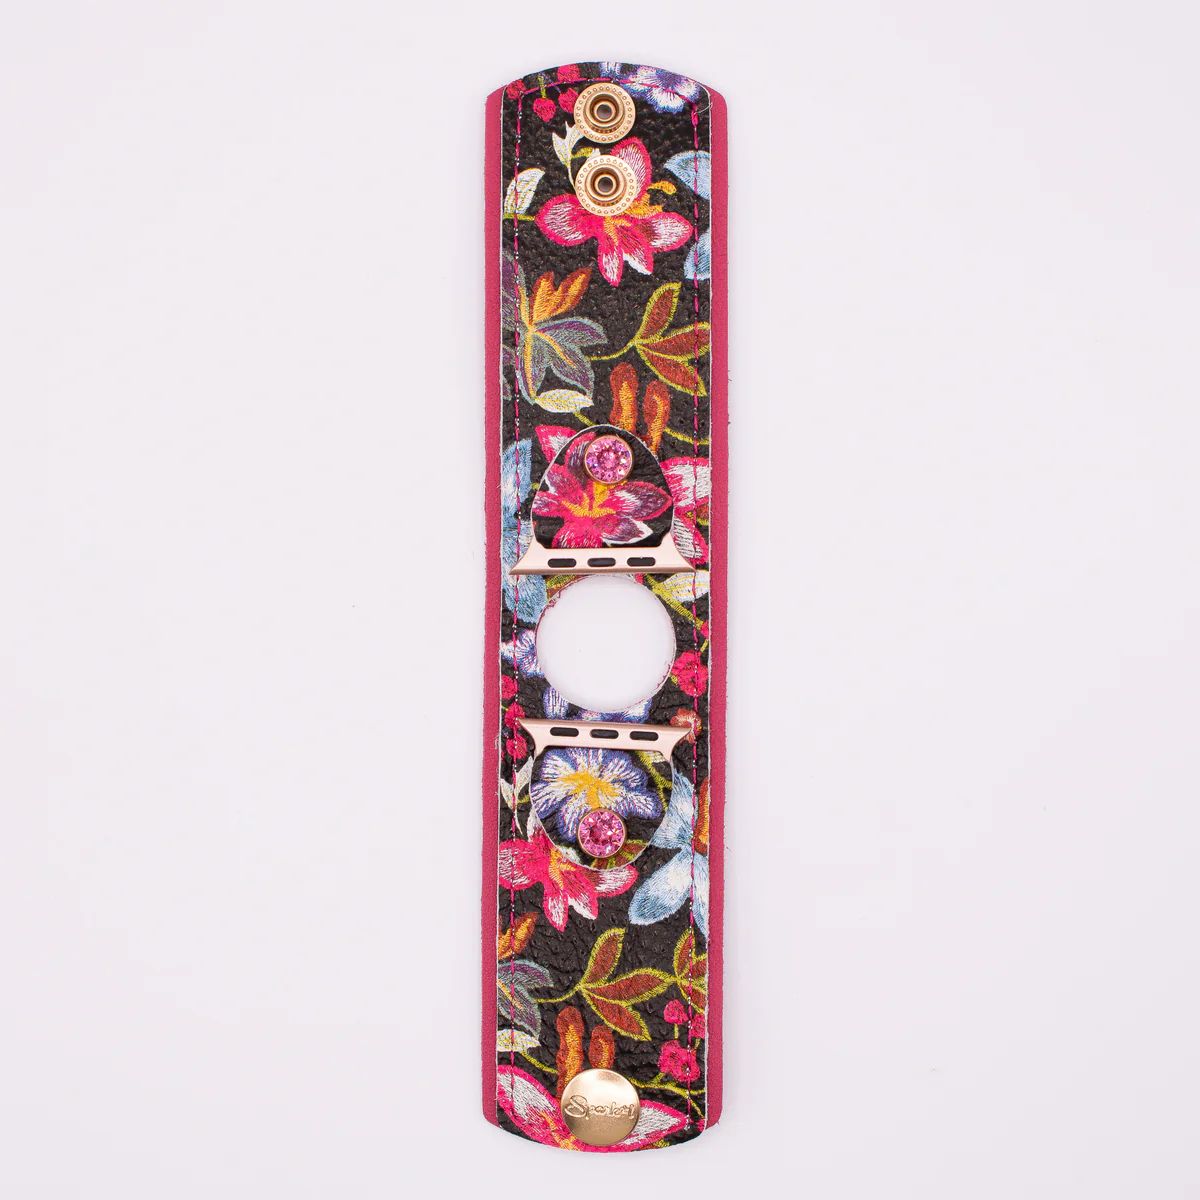 BLESSING BAND - Cuff Band in Night Flowers (All Sizes, All Watch Types) | Spark*l